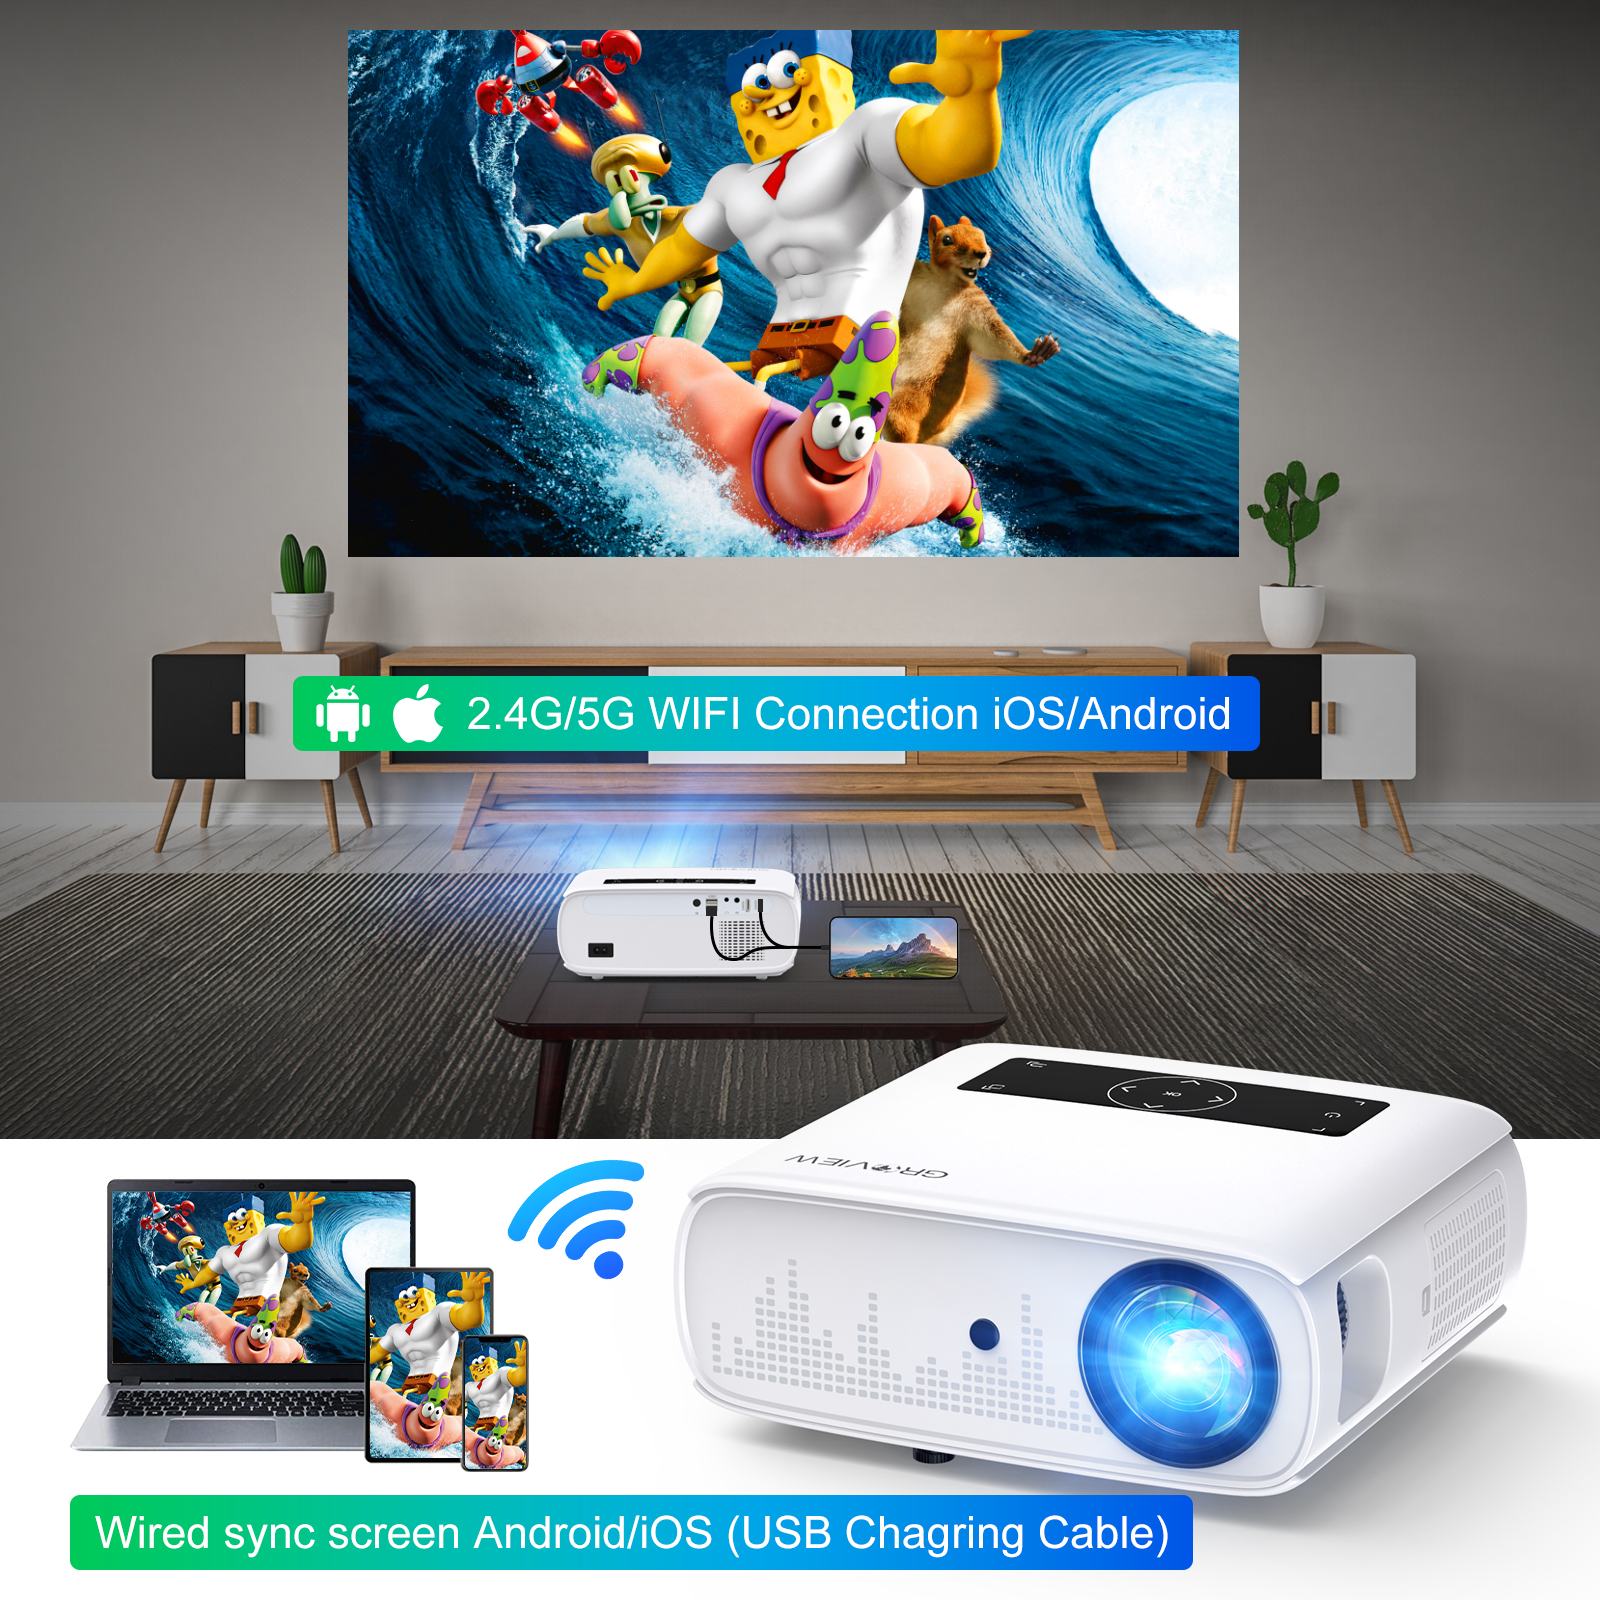 Groview 5G/2.4G WiFi Bluetooth Projector, 12000 Lux Native 1080P Projector  with 100 Projector Screen, 4K Supported Outdoor Movie Projector, Home  Theater Projector Compatible with iOS/Android 